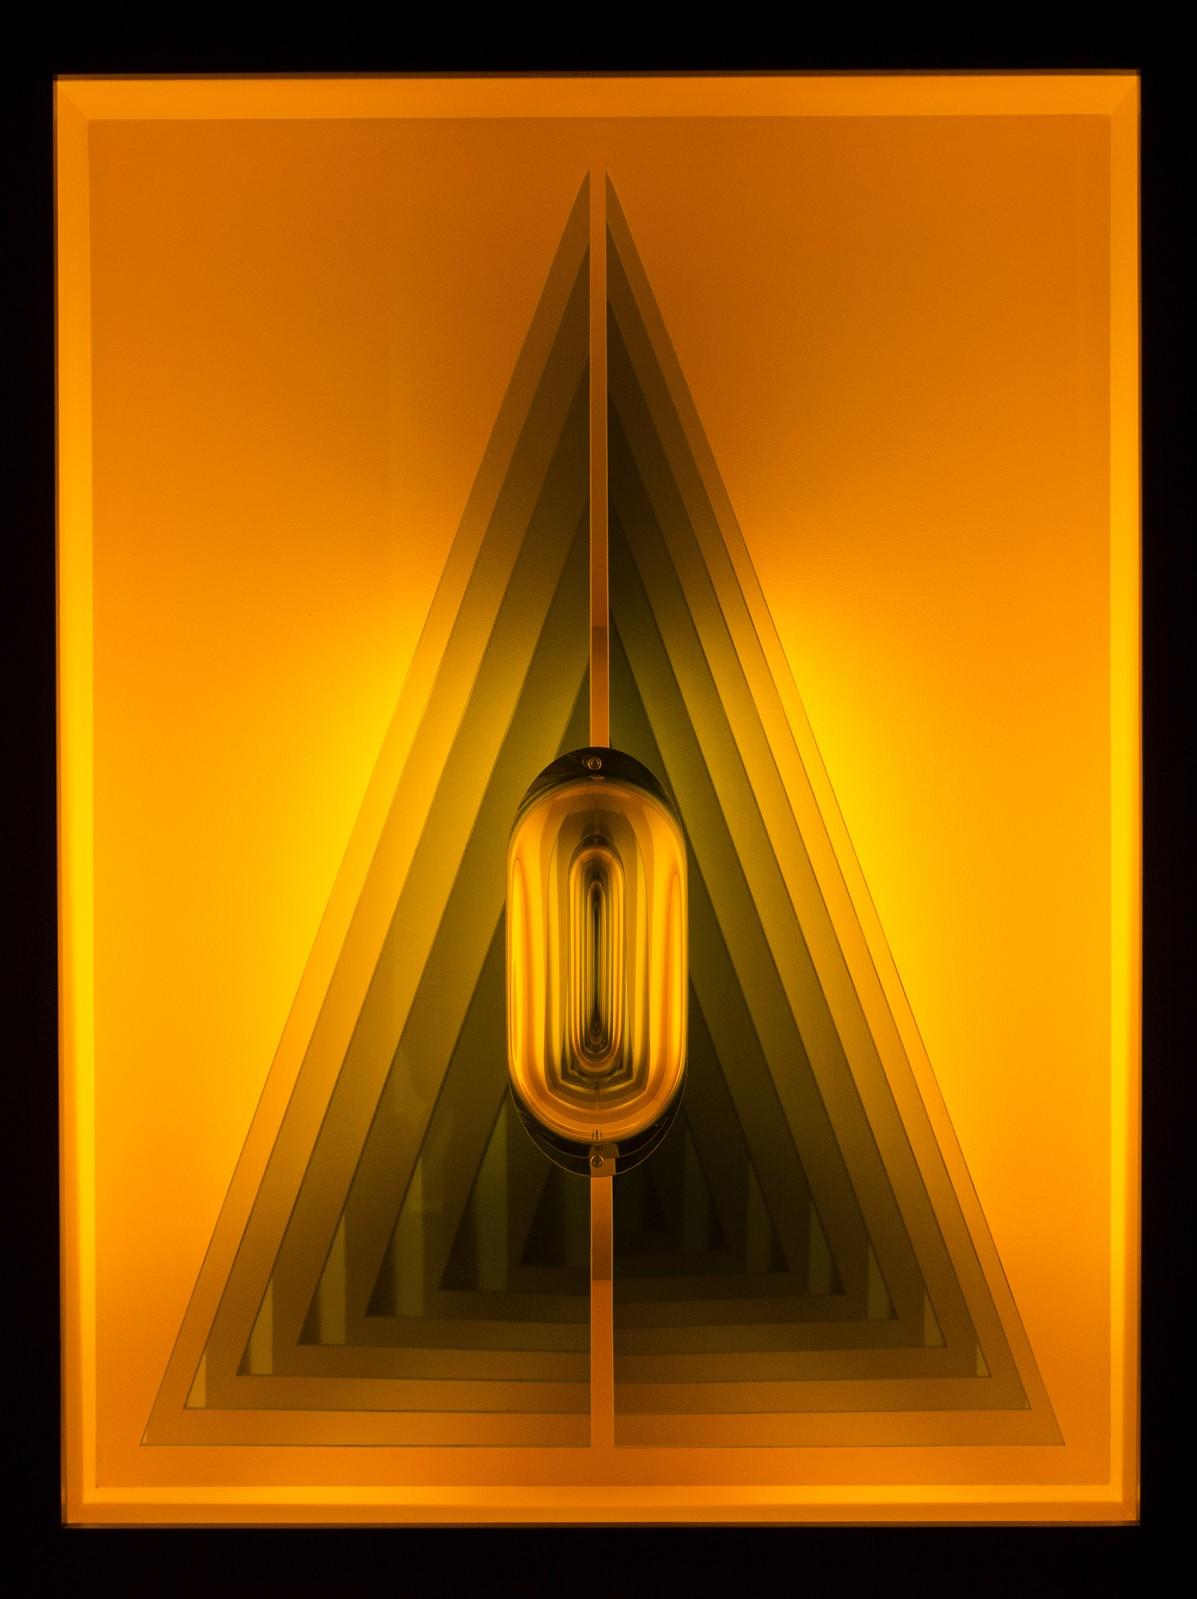 Acute Triangle - Illuminated geometric forms in amber yellow - Mixed Media Art by Kenneth Emig